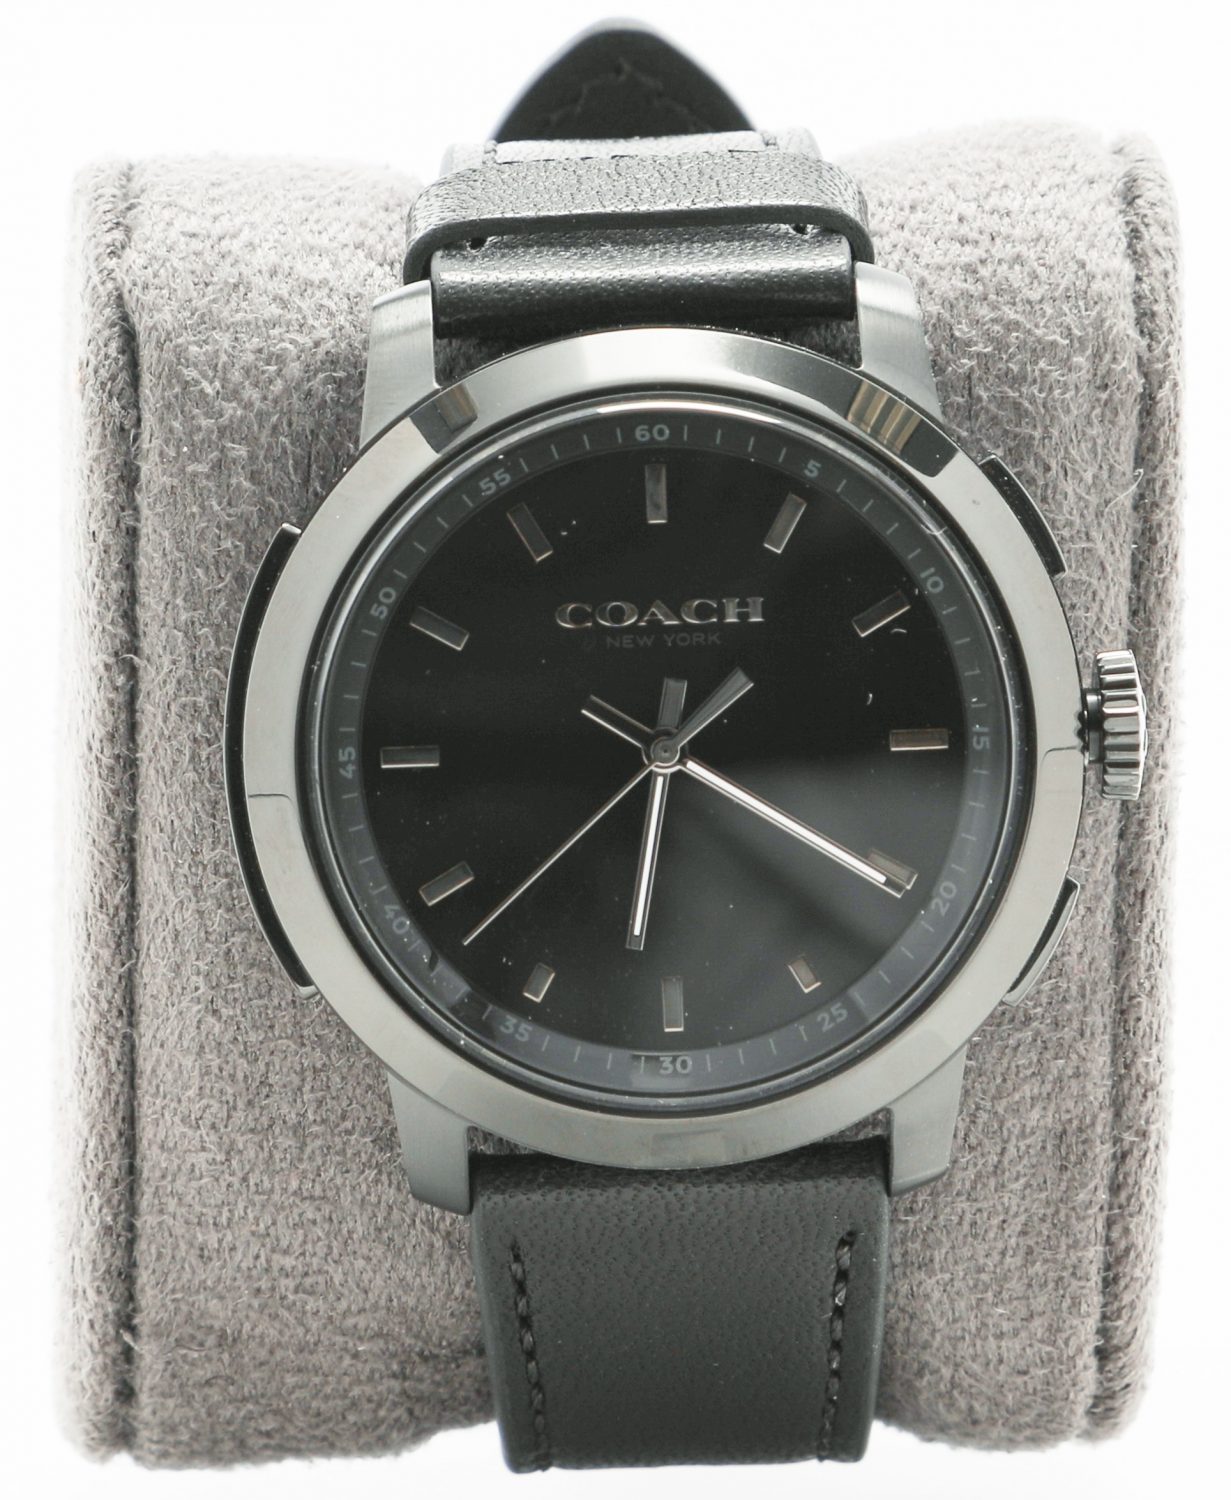 Photo of the Coach smartwatch created in collaboration with HP.